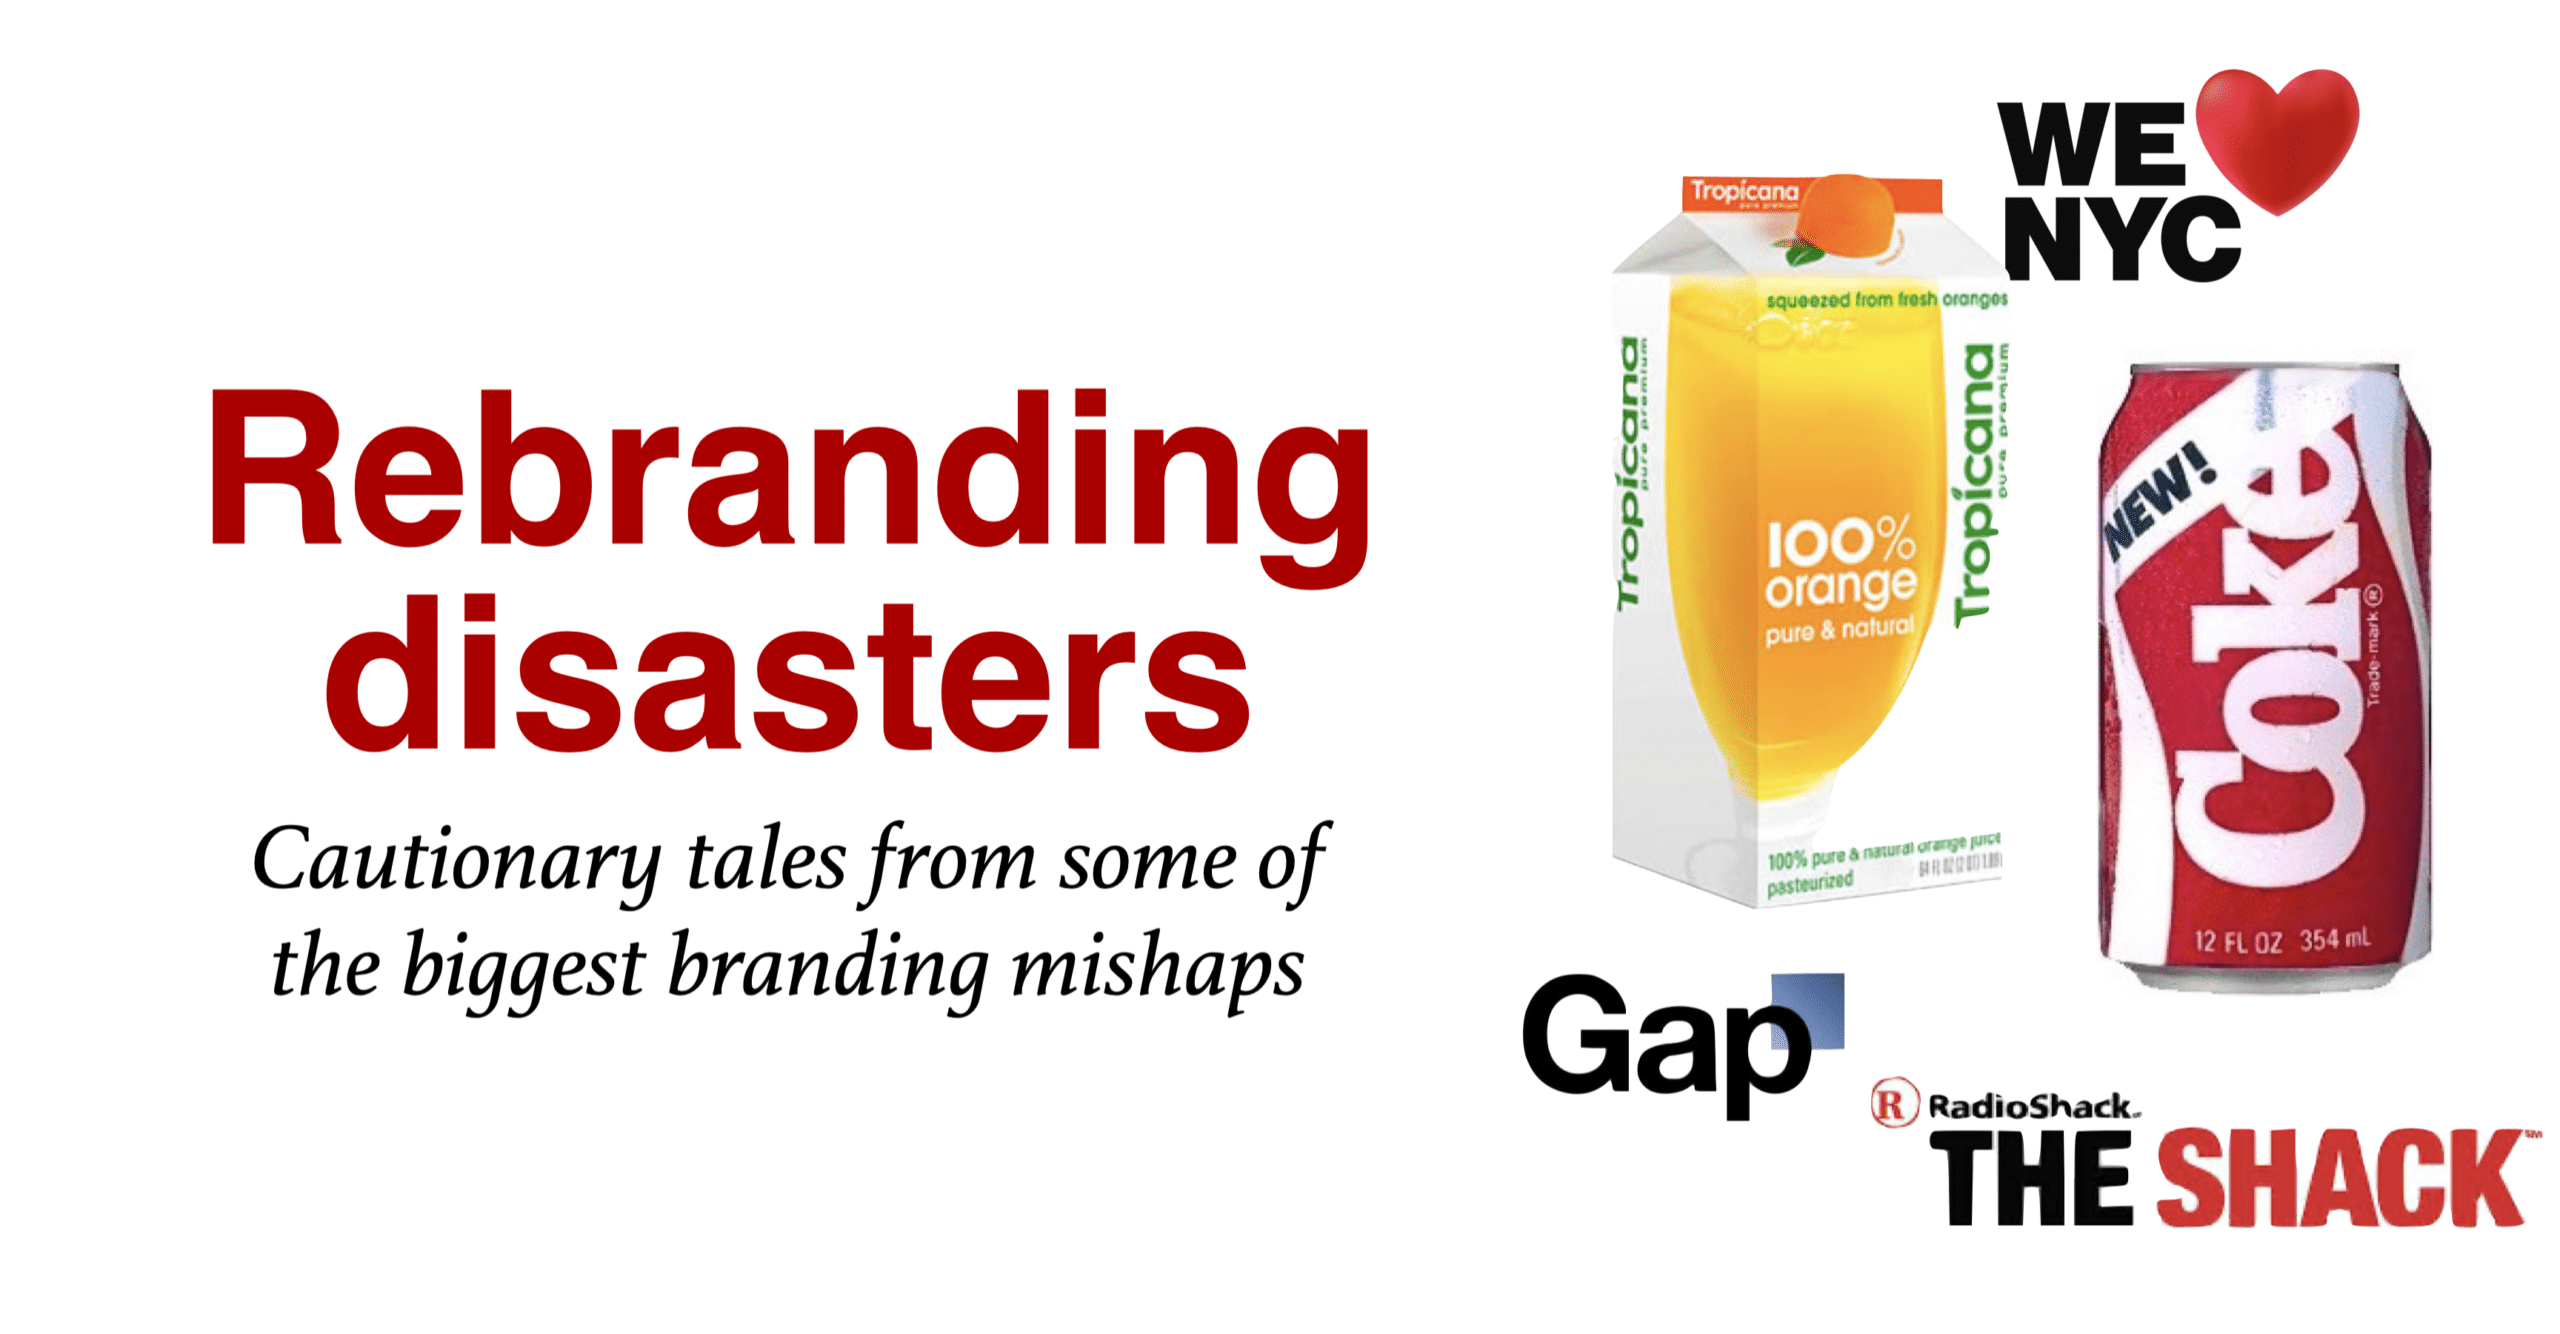 Rebranding disasters from the biggest branding mishaps